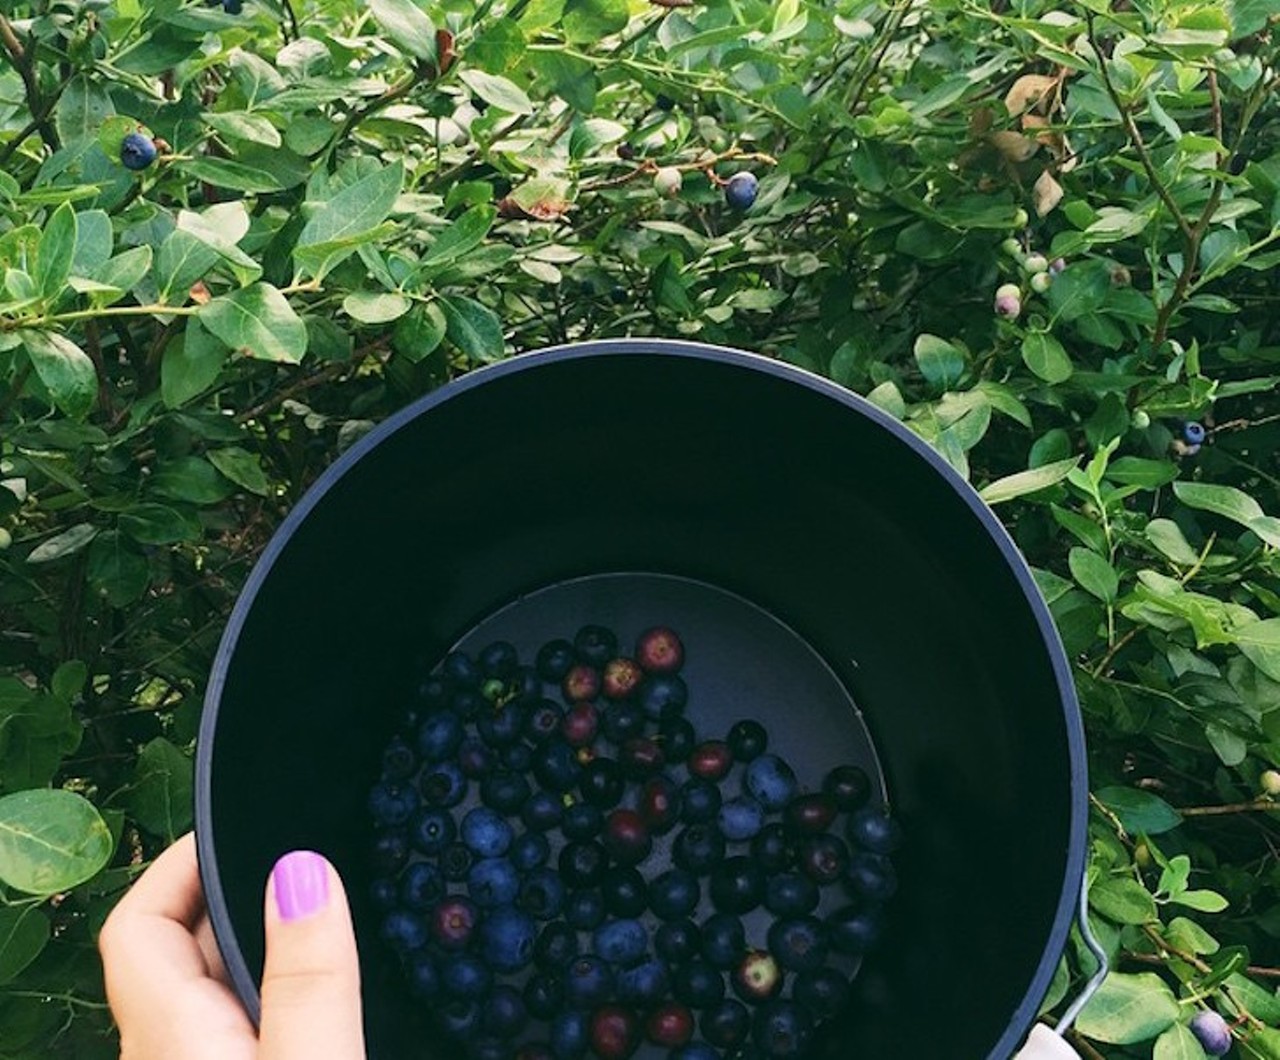 Chapman's Berries
75 Nolte Road, St. Cloud | 321-624-9482
Chapman&#146;s is all about that berry, black and blue to be more specific. These farm fanatics are slinging massive buckets of berries all season long for $20.
Photo via amtorres08/Instagram